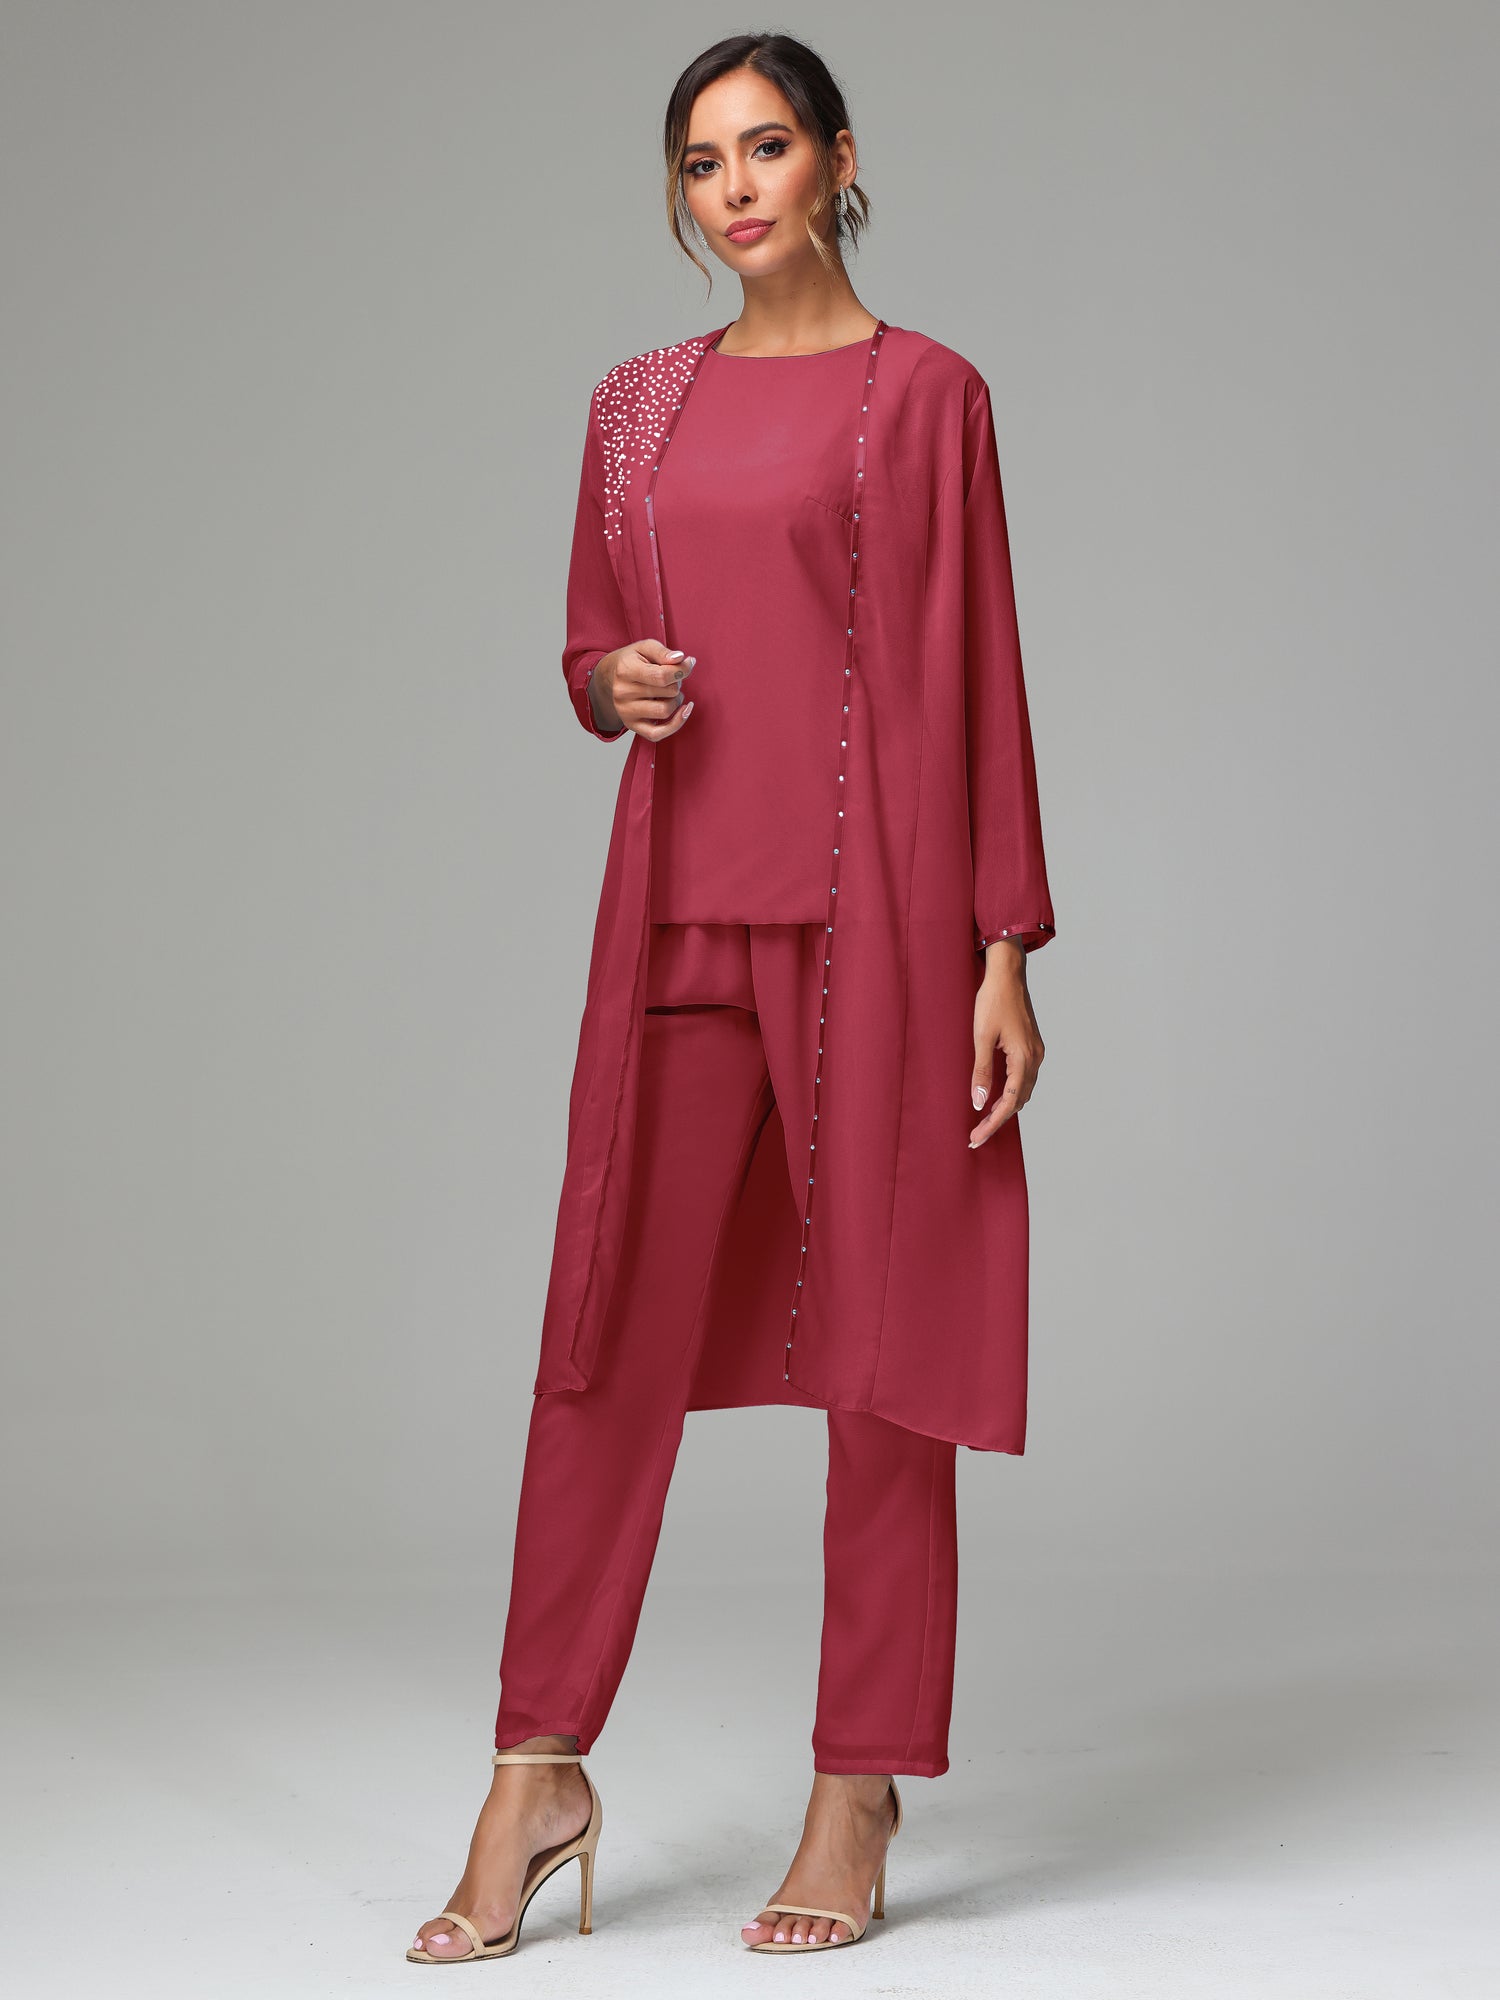 Elegant Trouser Suits For Ladies for Your Next Event